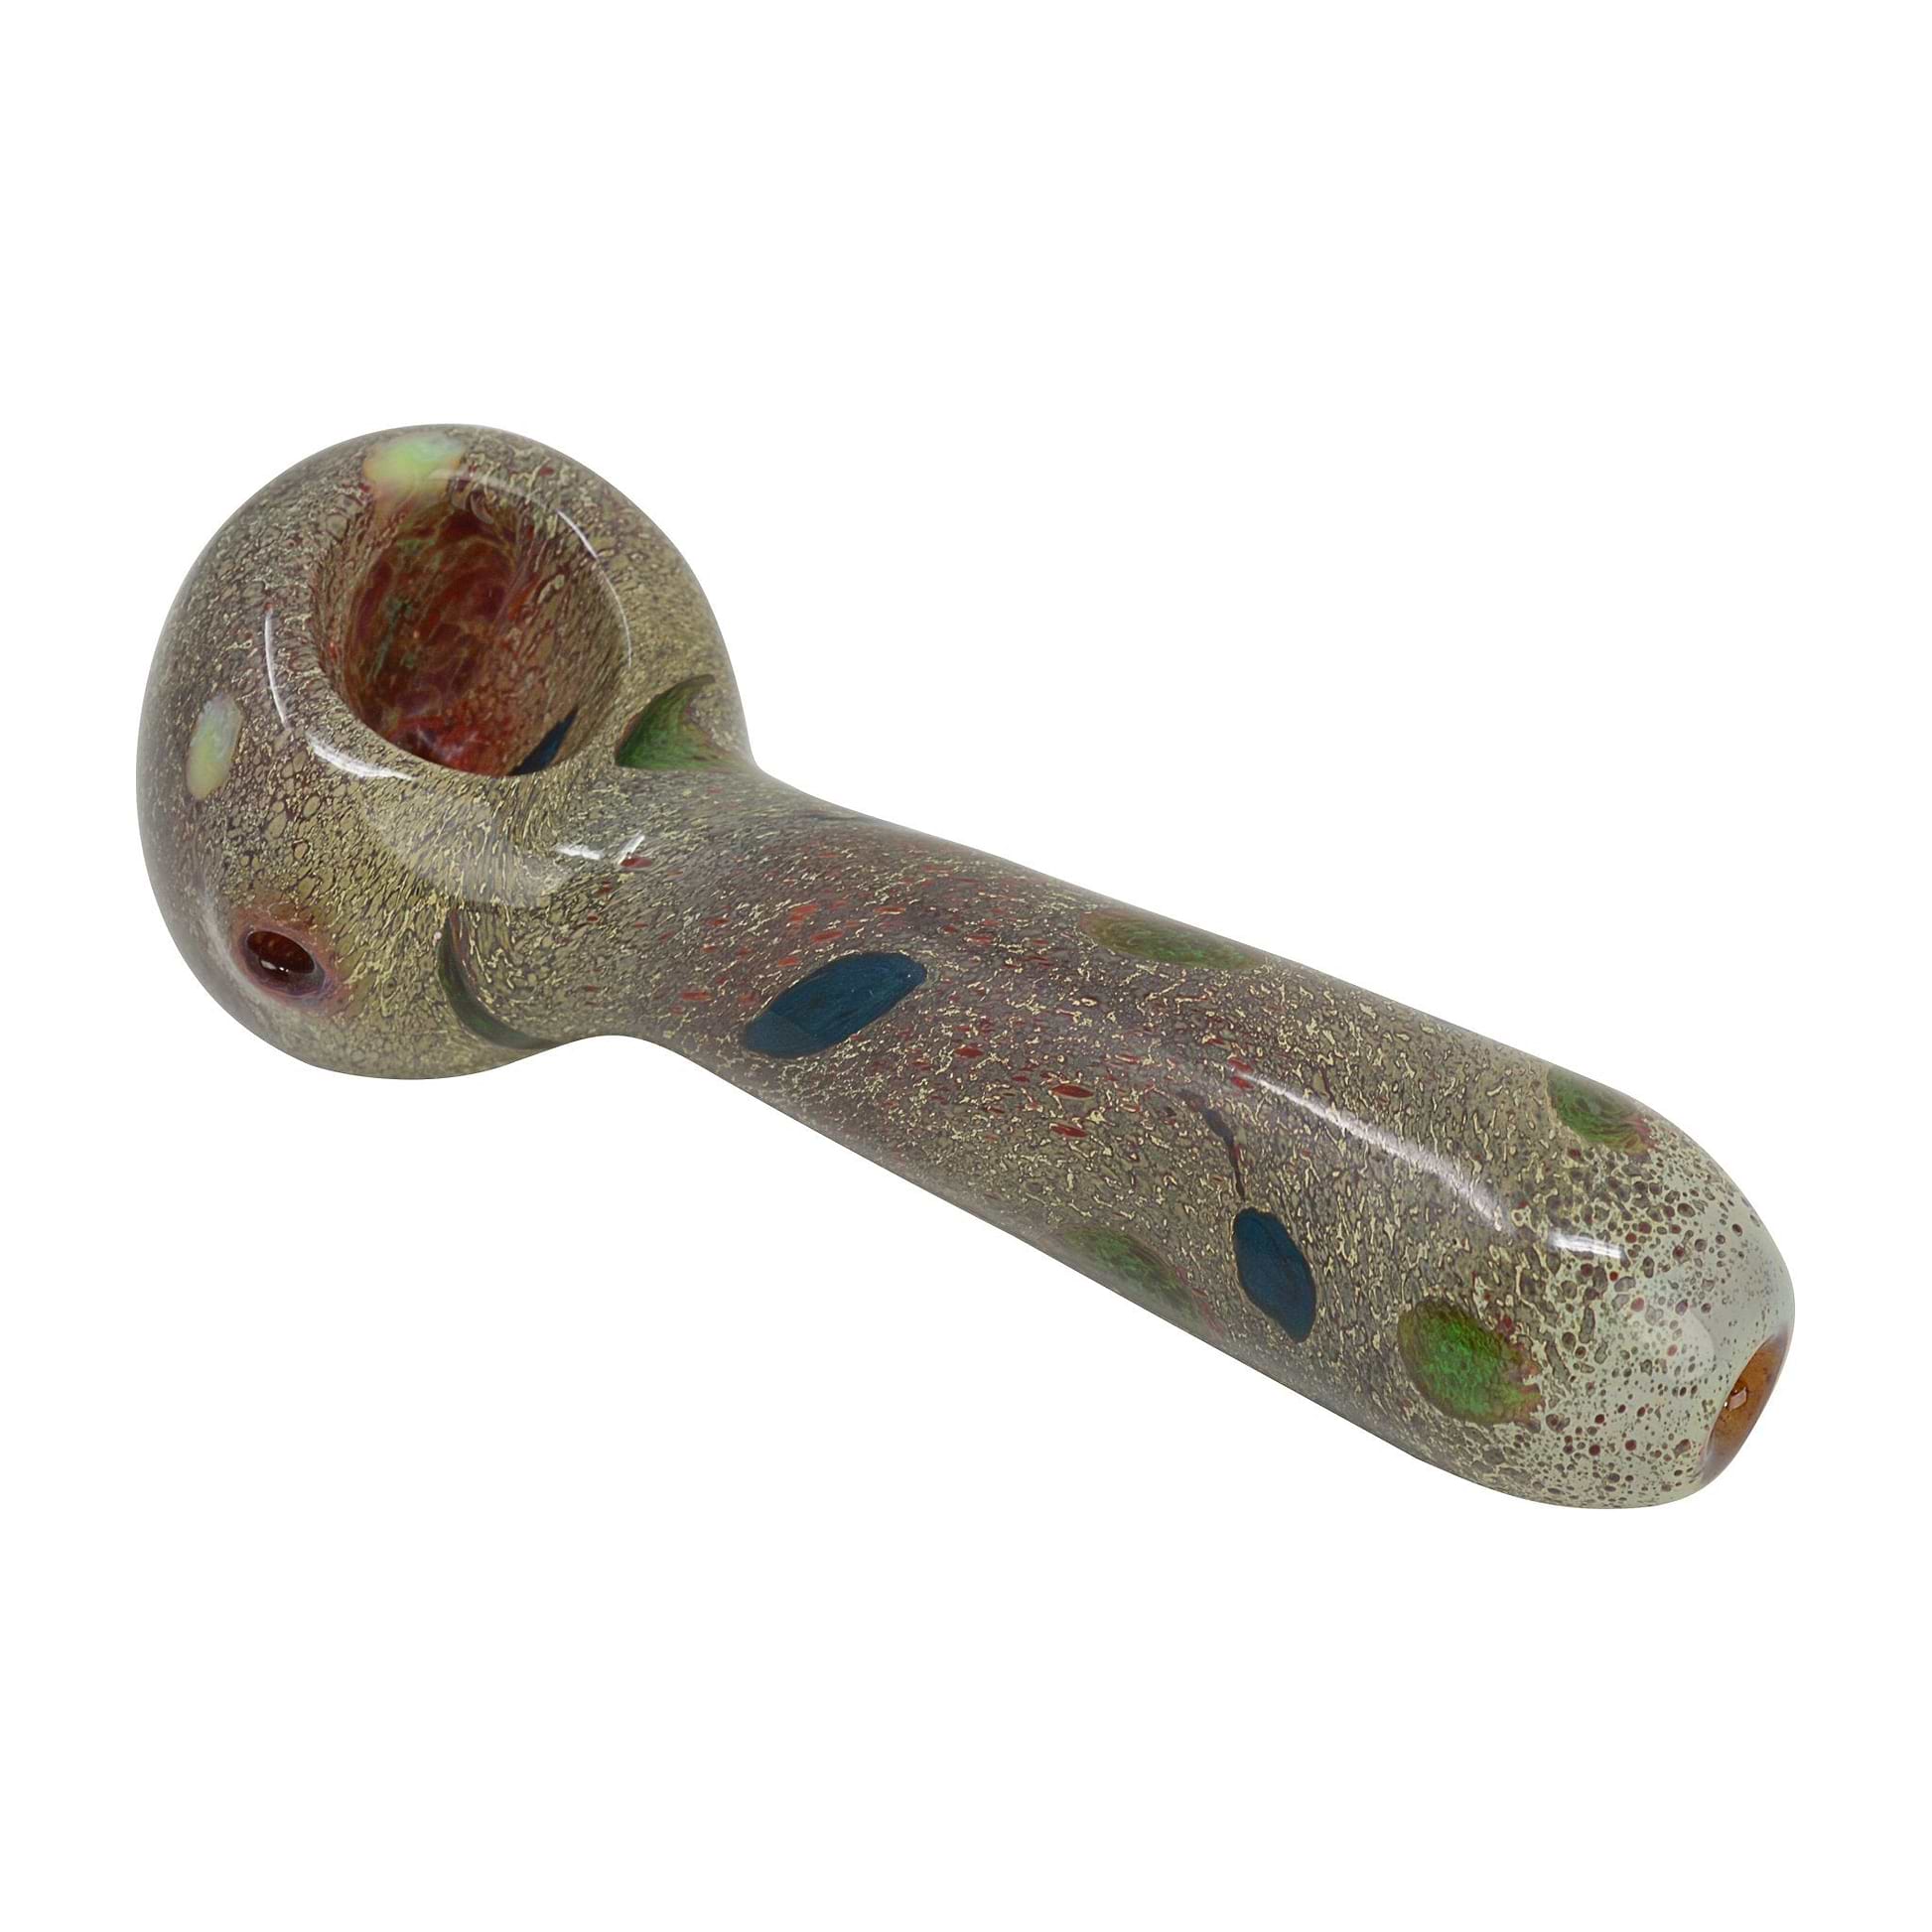 5-inch compact glass bubbler smoking device aquatic undersea plant fish granite-like design in an easy-to-hold spoon shape